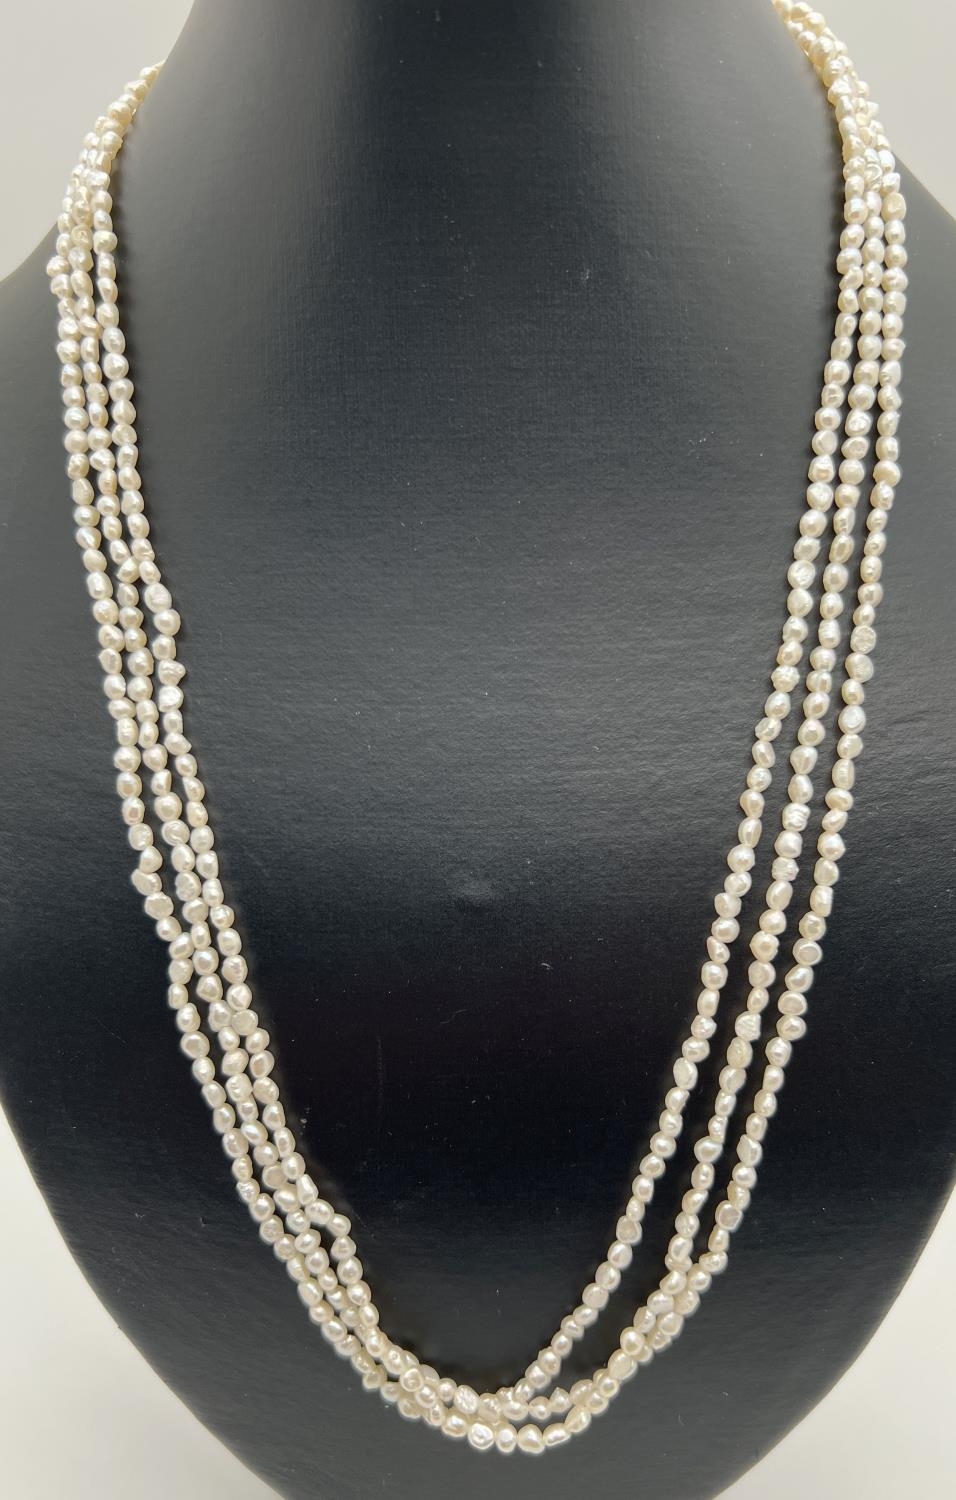 A 22 inch 3 strand small baroque pearl necklace with gold tone pierced work clasp.